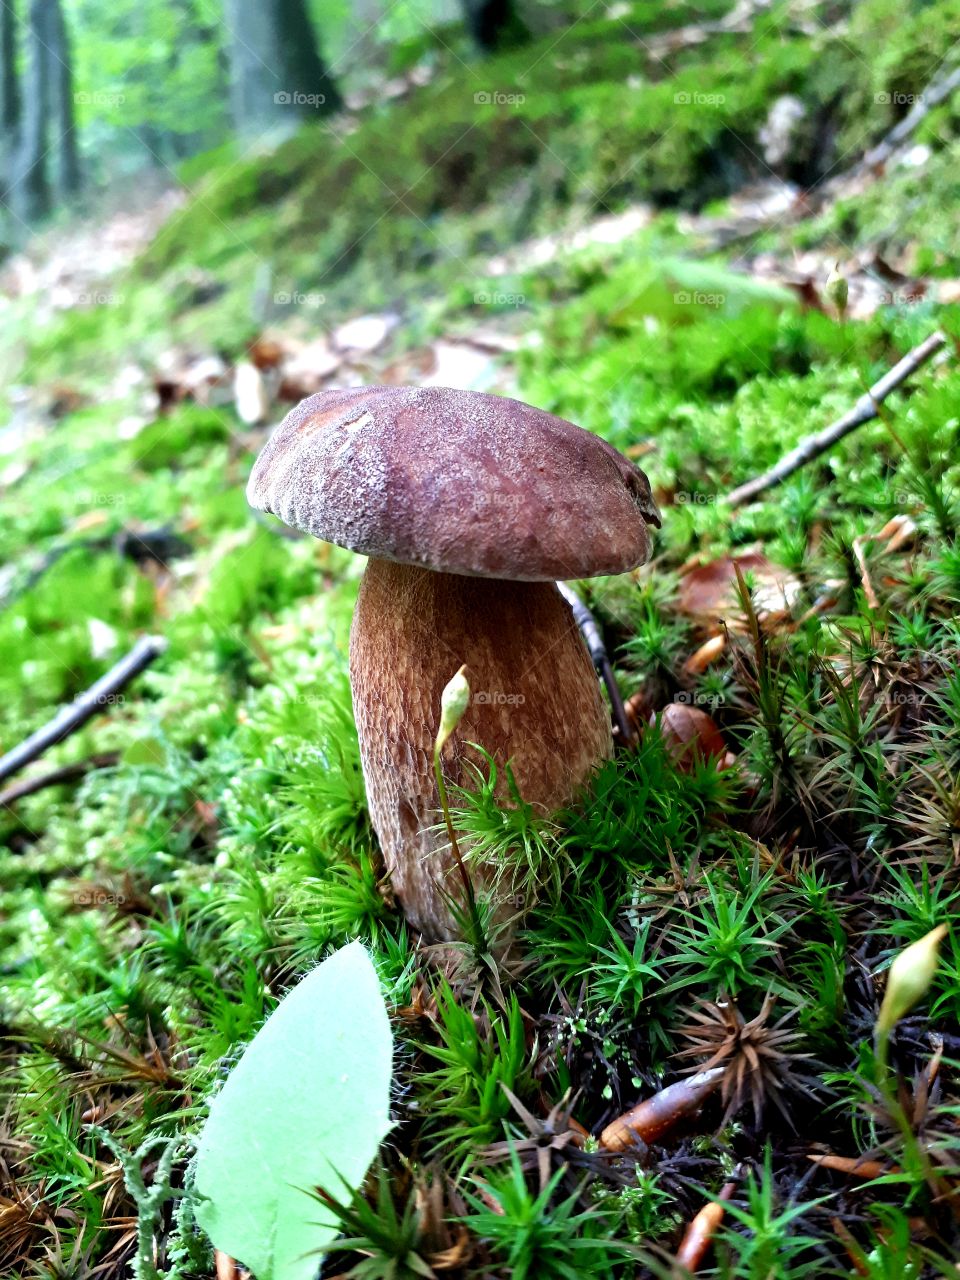 One of the most beautiful Boletus I've ever had